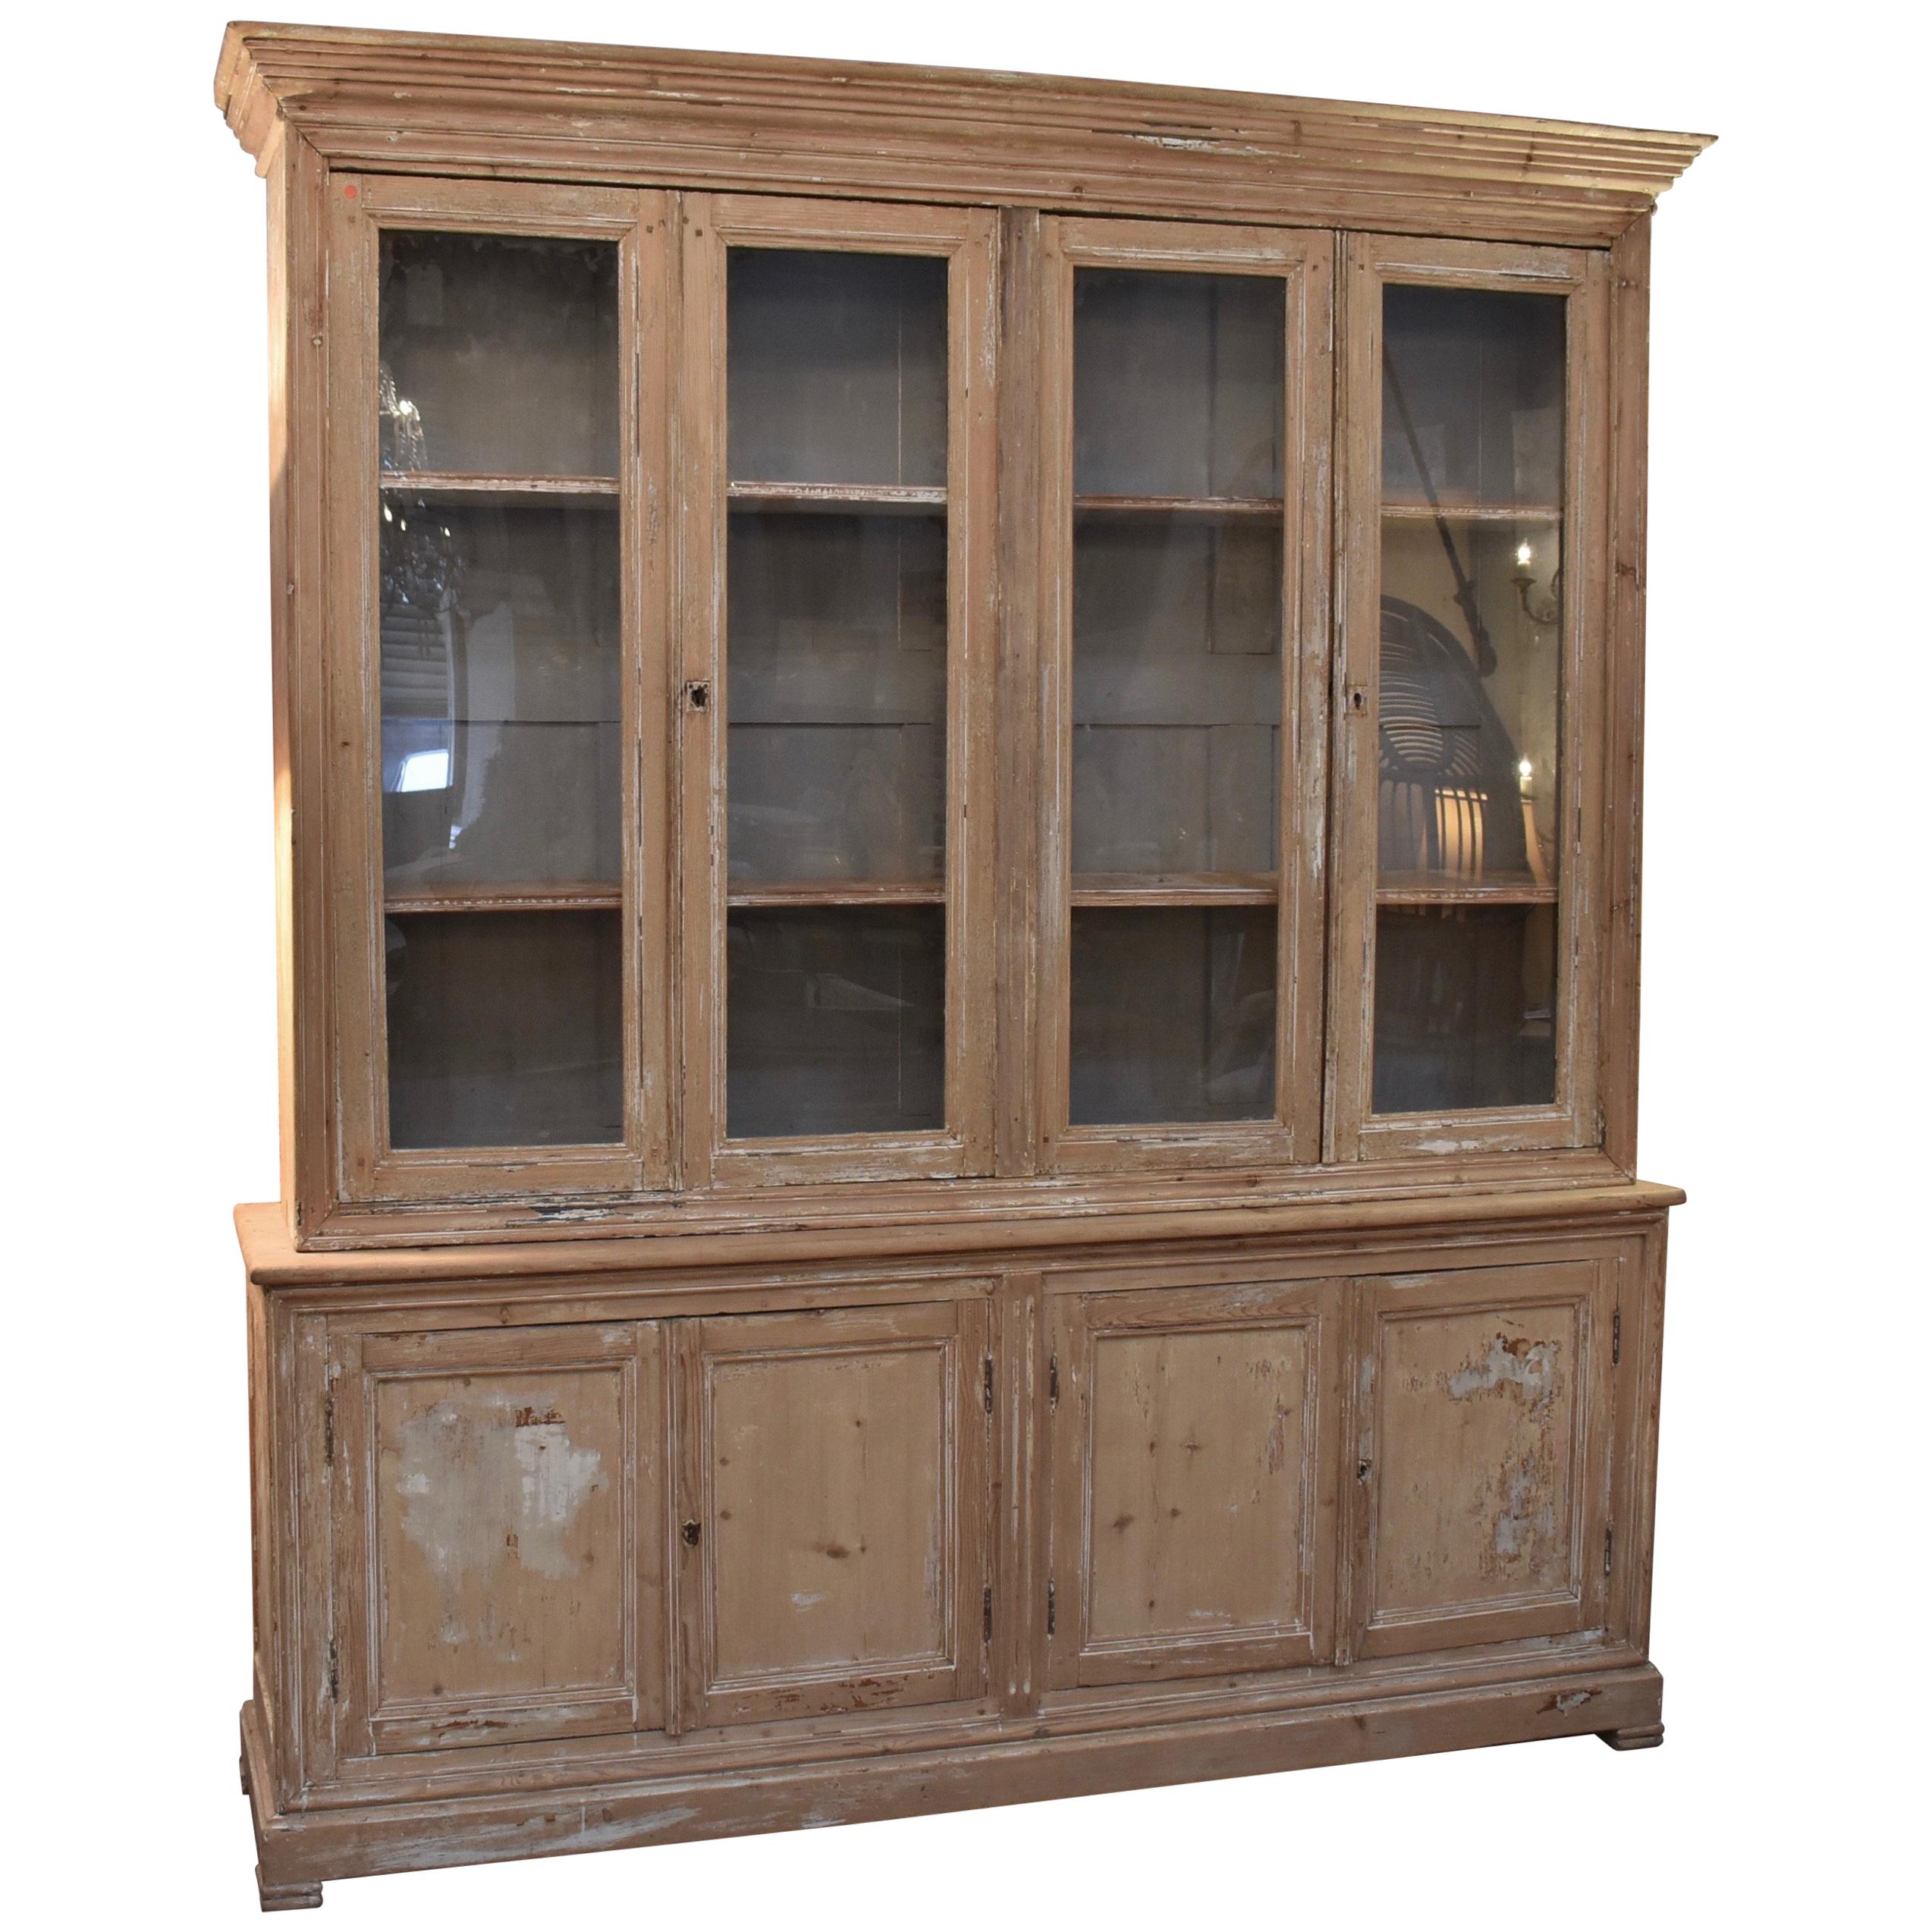 Early 19th Century Swedish Library Cupboard Bookcase